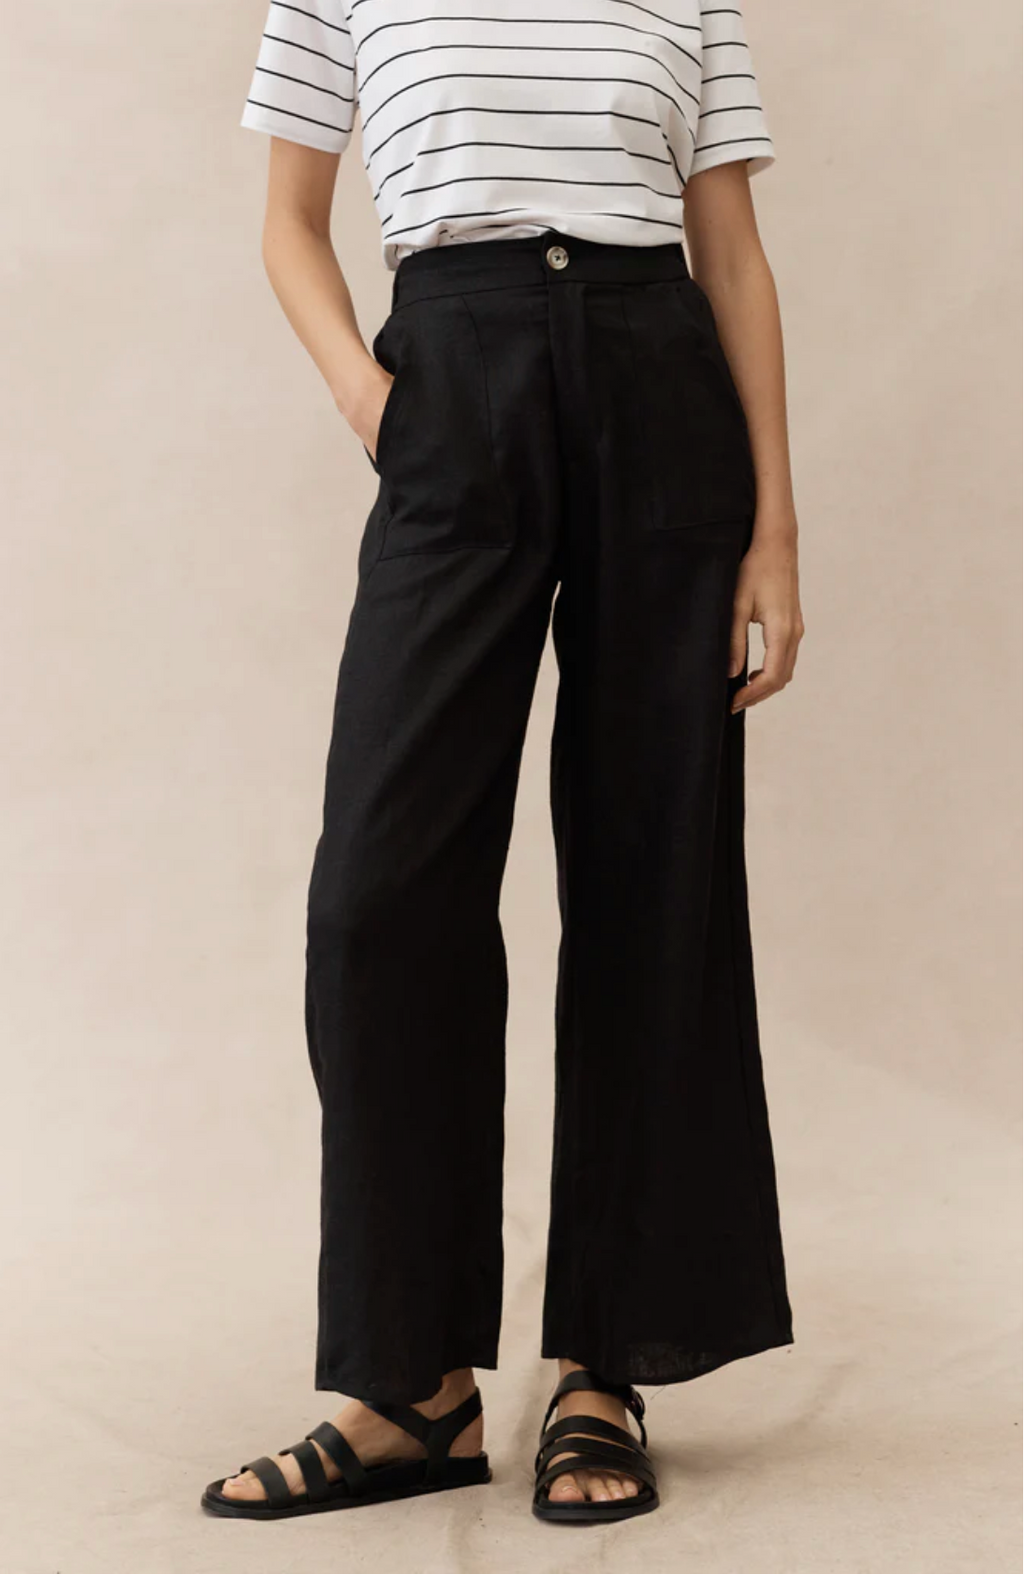 The Jude Linen pants by Little Lies are a wide leg black linen pants with zip and button closure and side pockets 